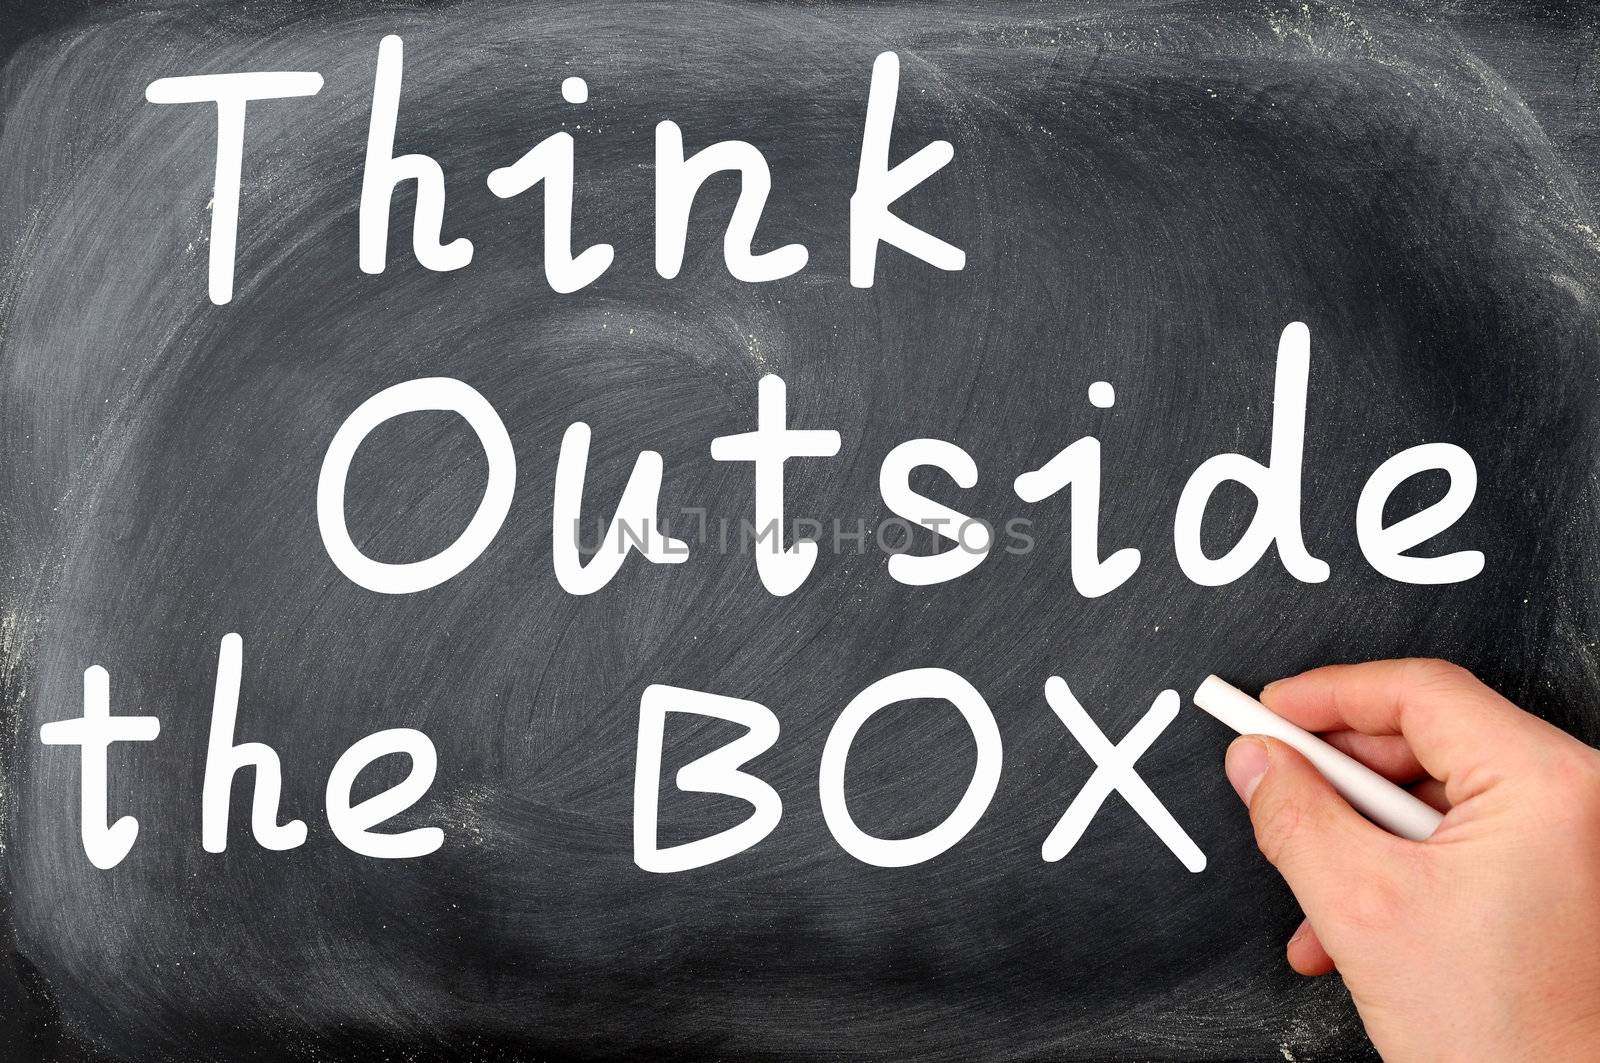 Think outside the box written on a Blackboard background with a hand holding chalk